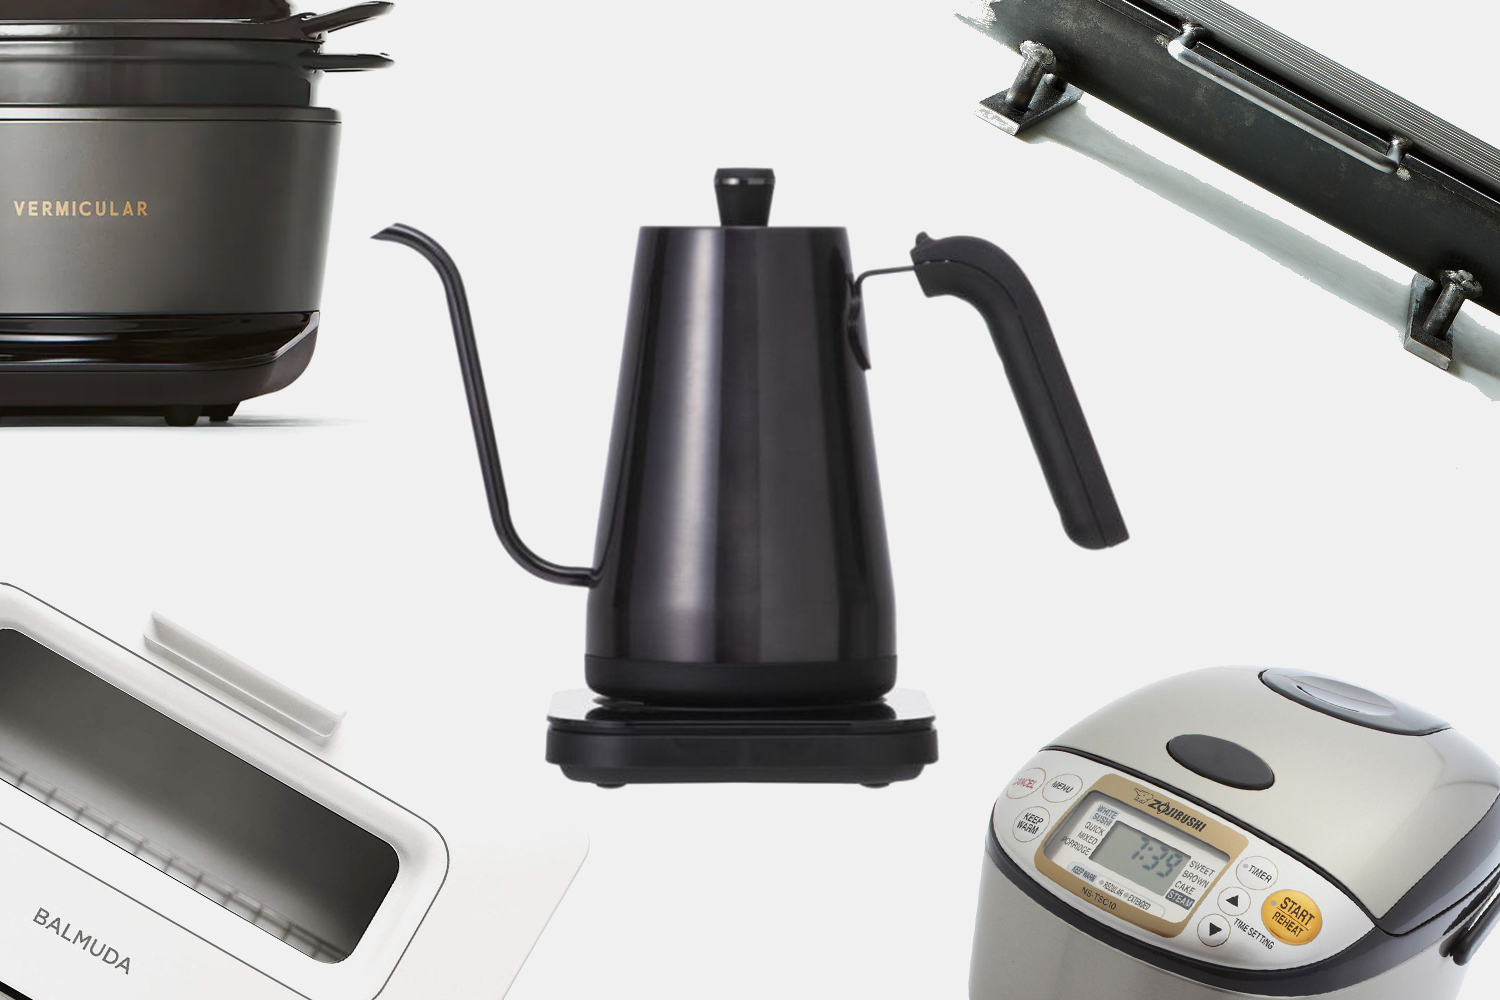 Find Marvelous, Advanced and Durable Japanese Kitchen Appliances 